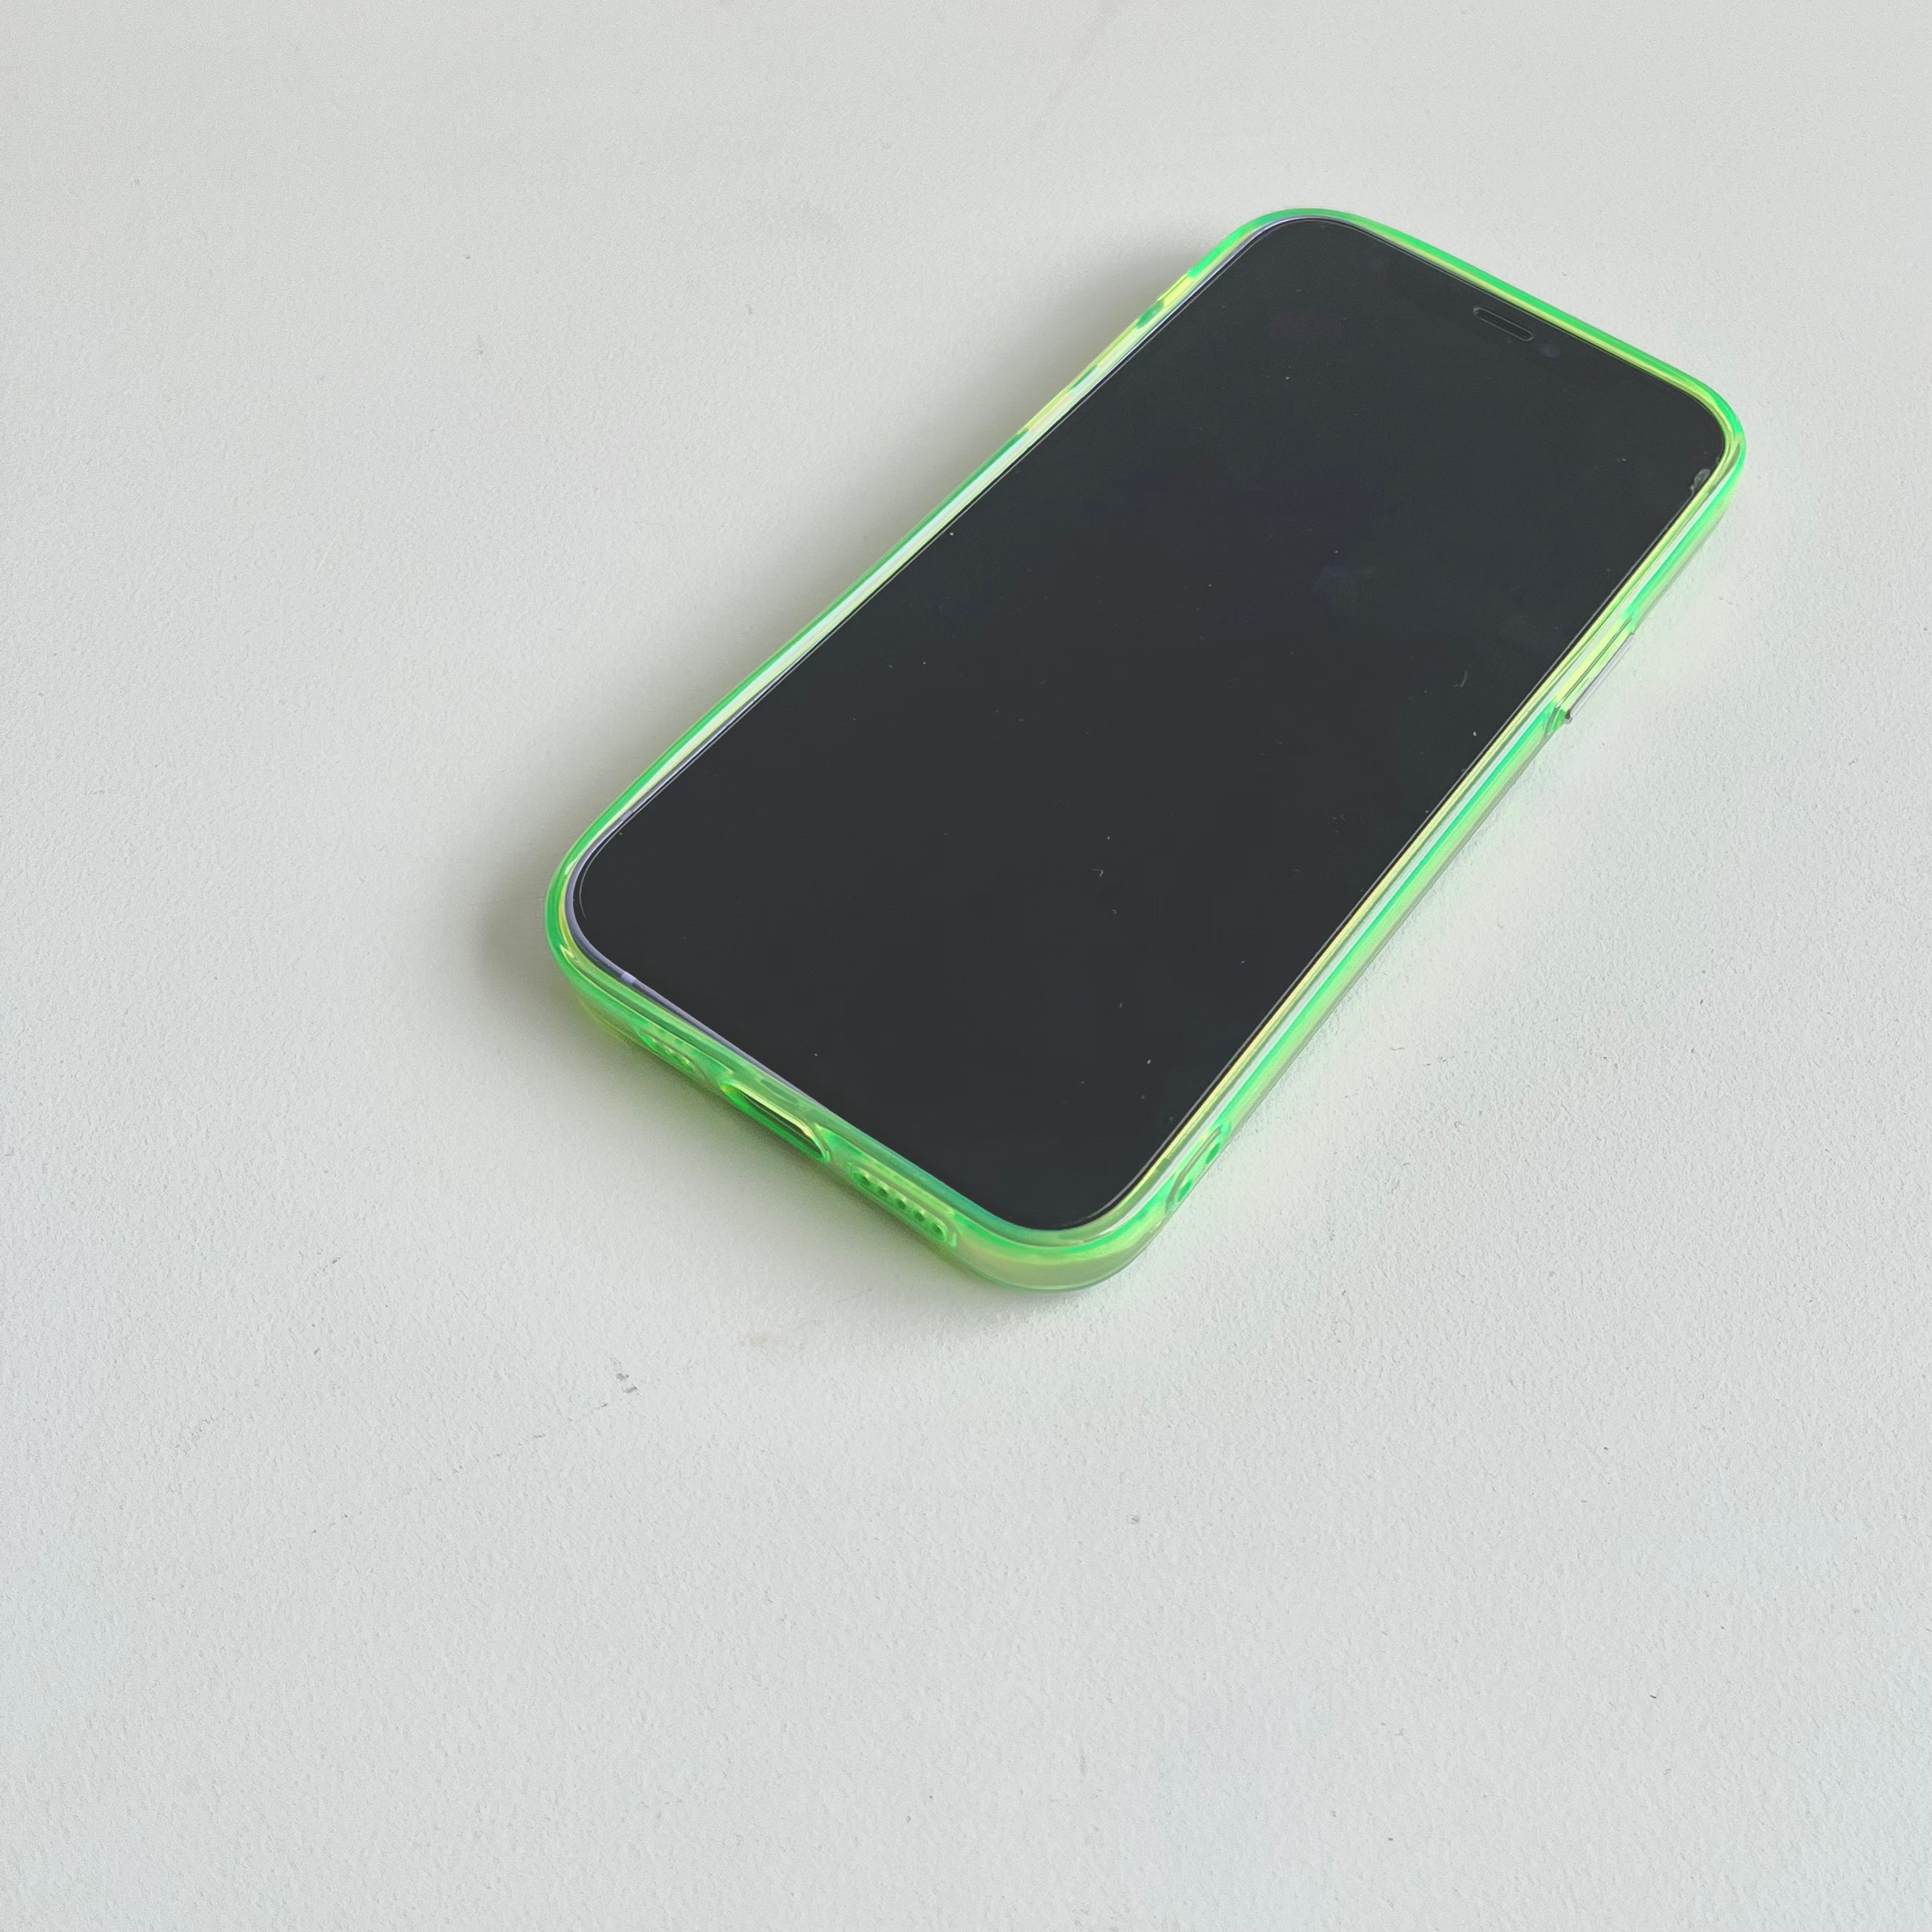 Neon Green iPhone Case by Veronique